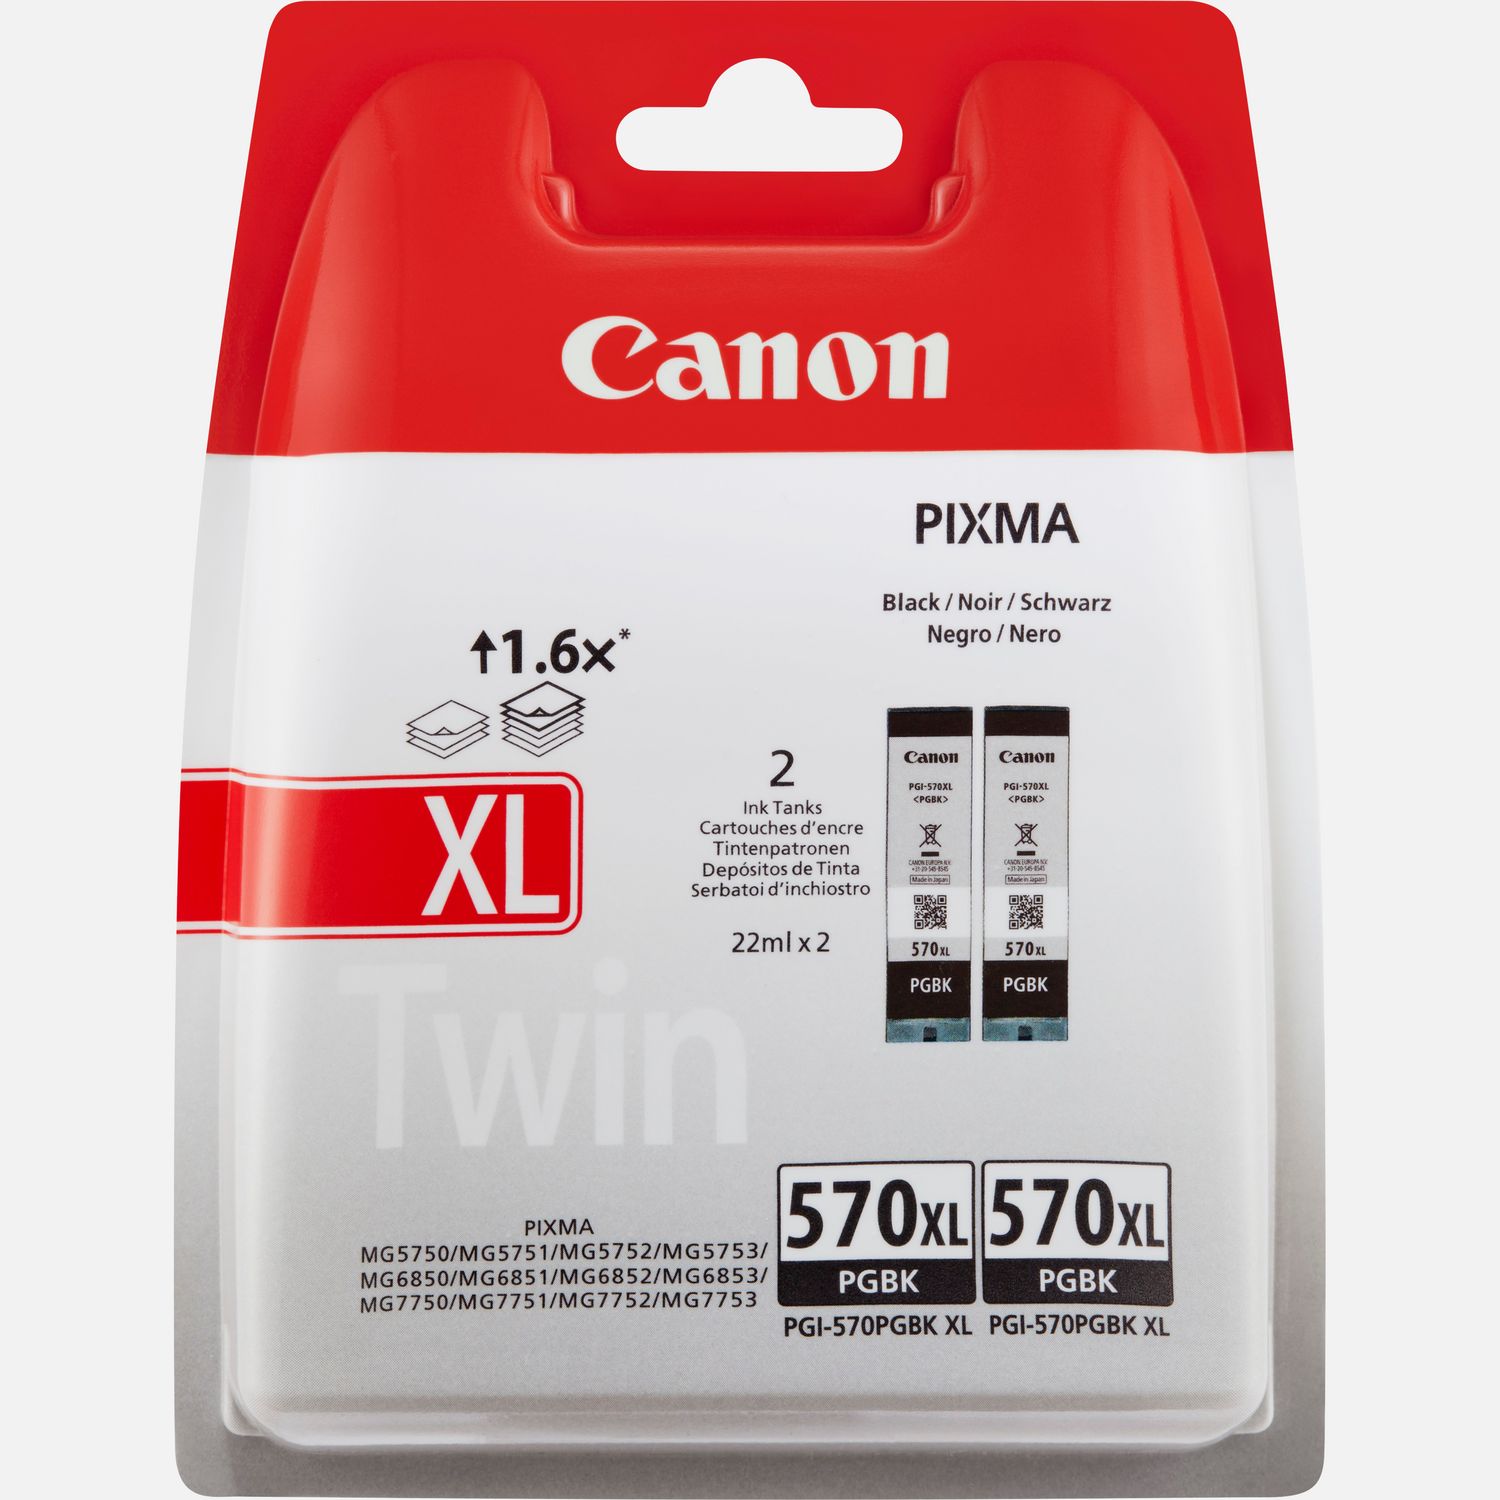 High Capacity Canon PGI-570XL Black Ink Cartridge, Fast, Free Delivery